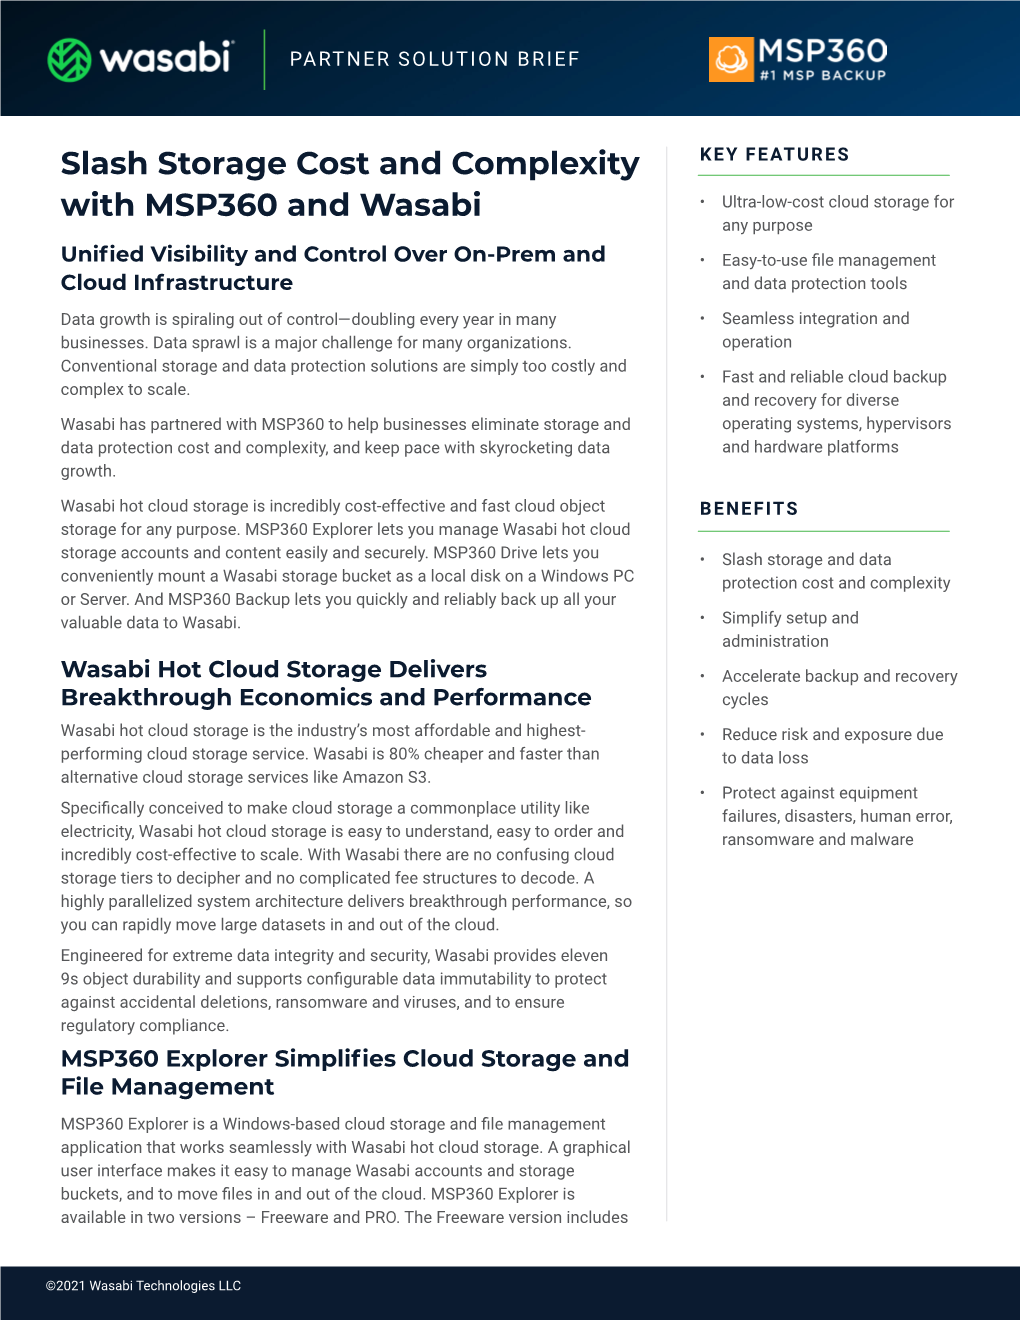 Slash Storage Cost and Complexity with MSP360 and Wasabi